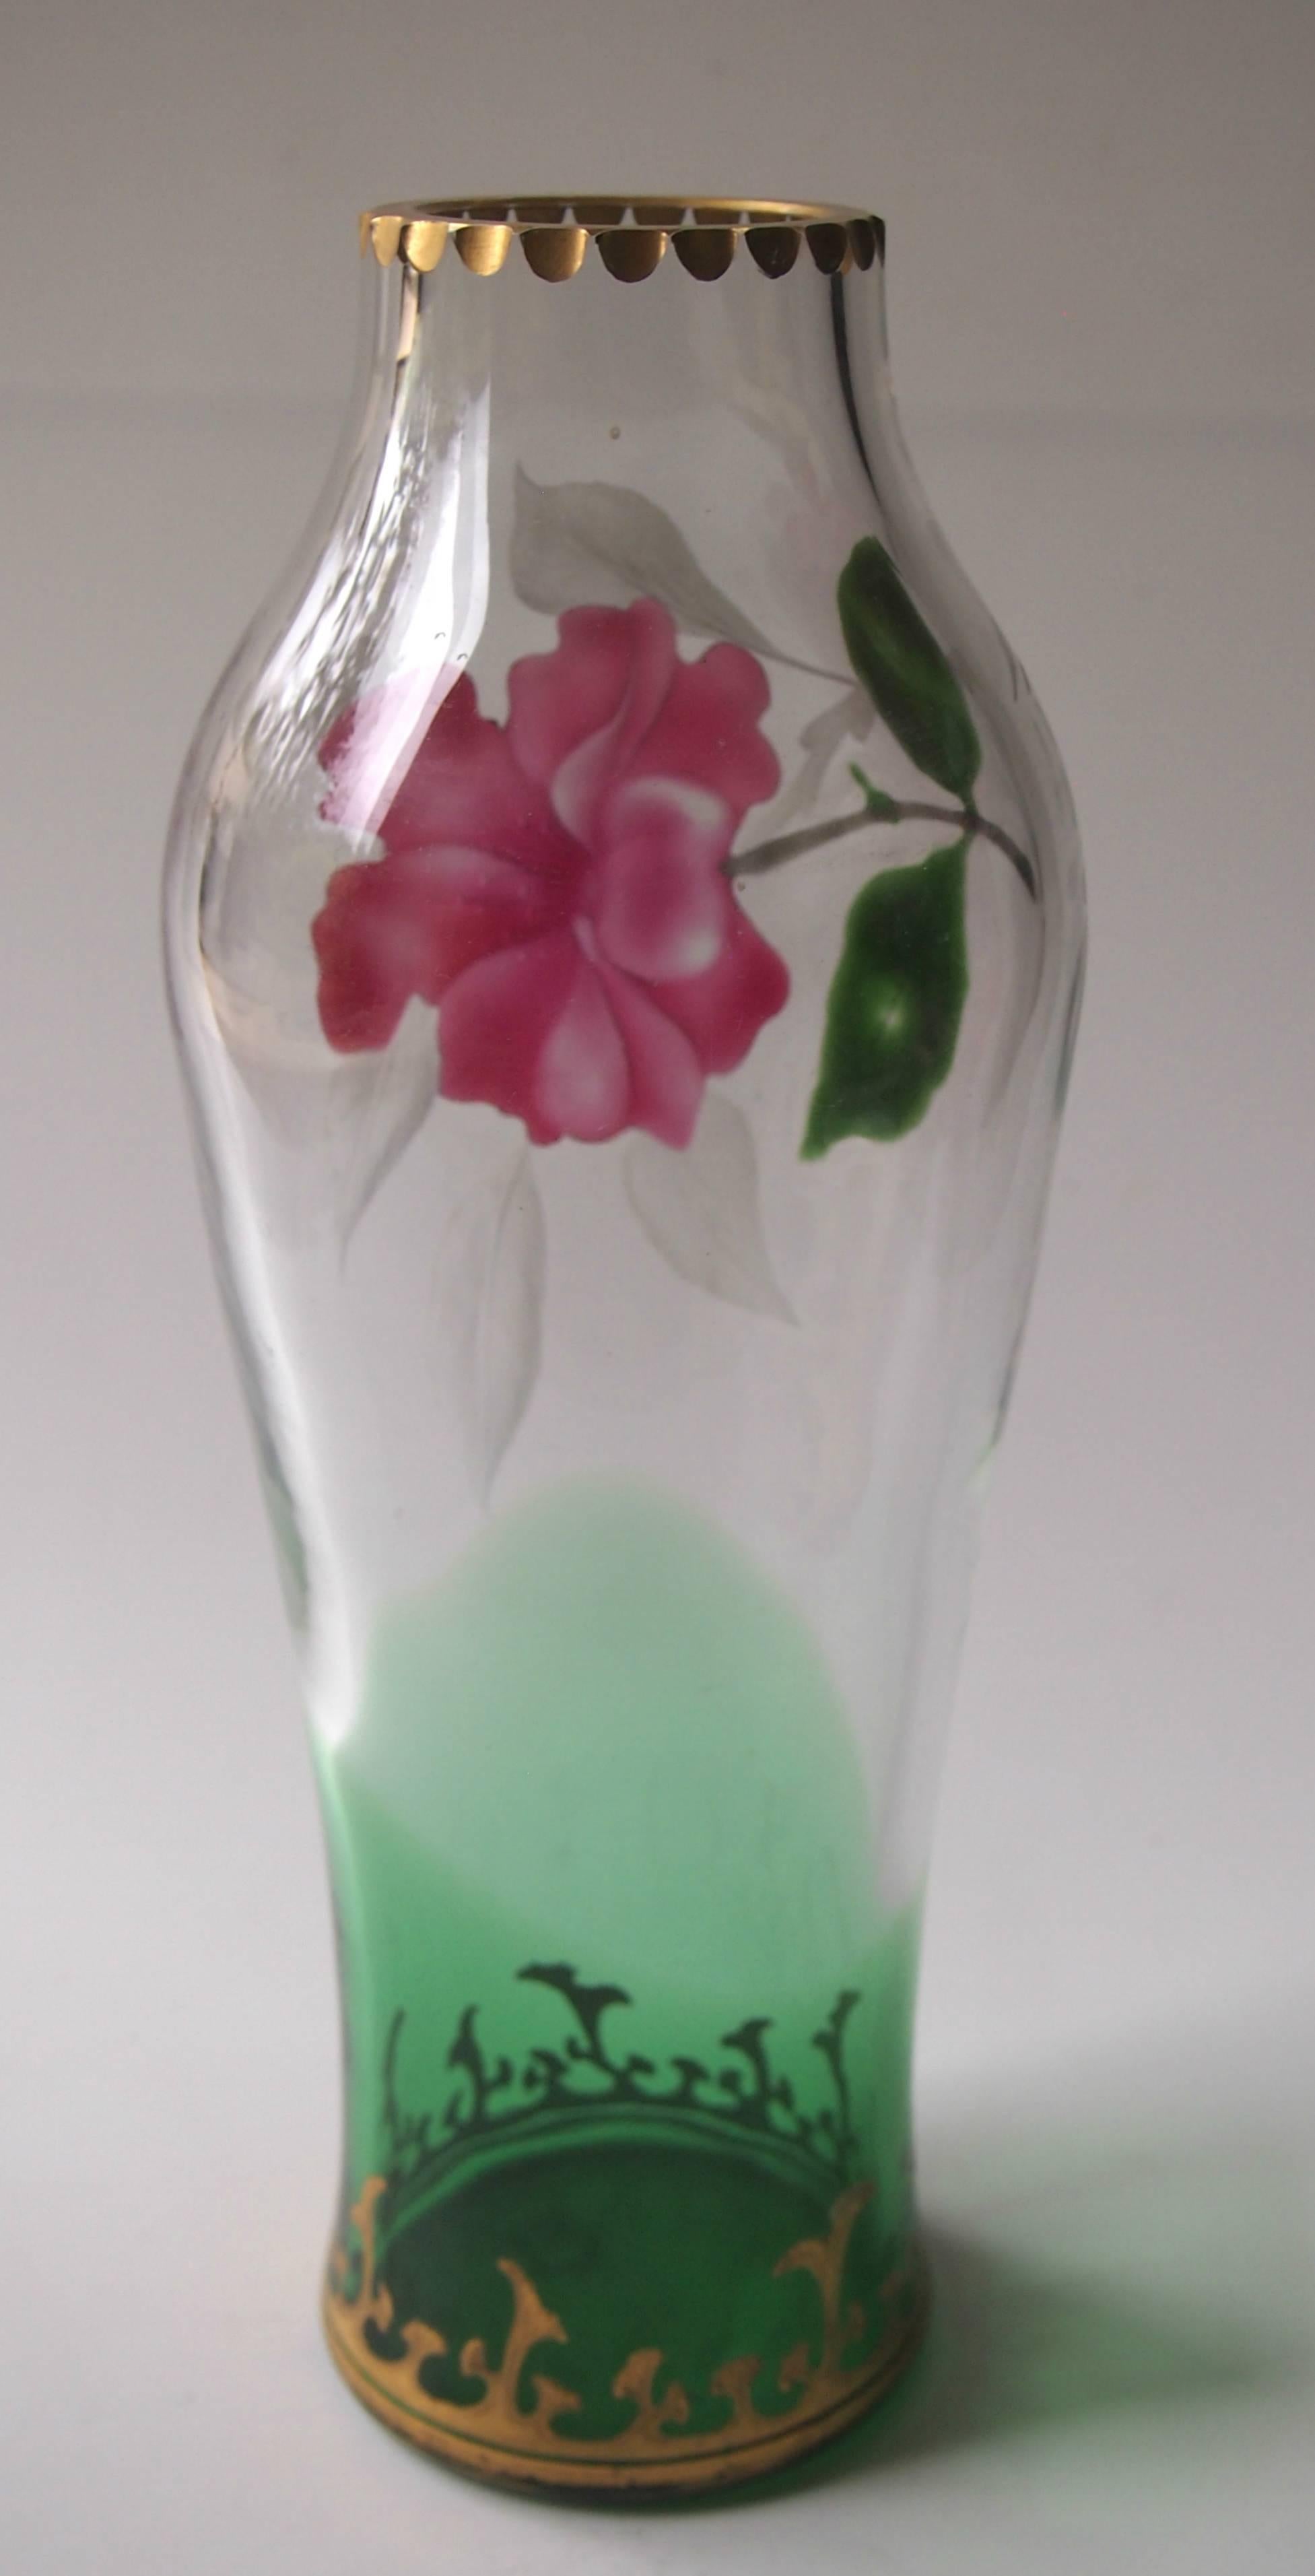 Czech Bohemian Art Nouveau Green/Clear Harrach Marquetry Glass Vase with Red Blossom